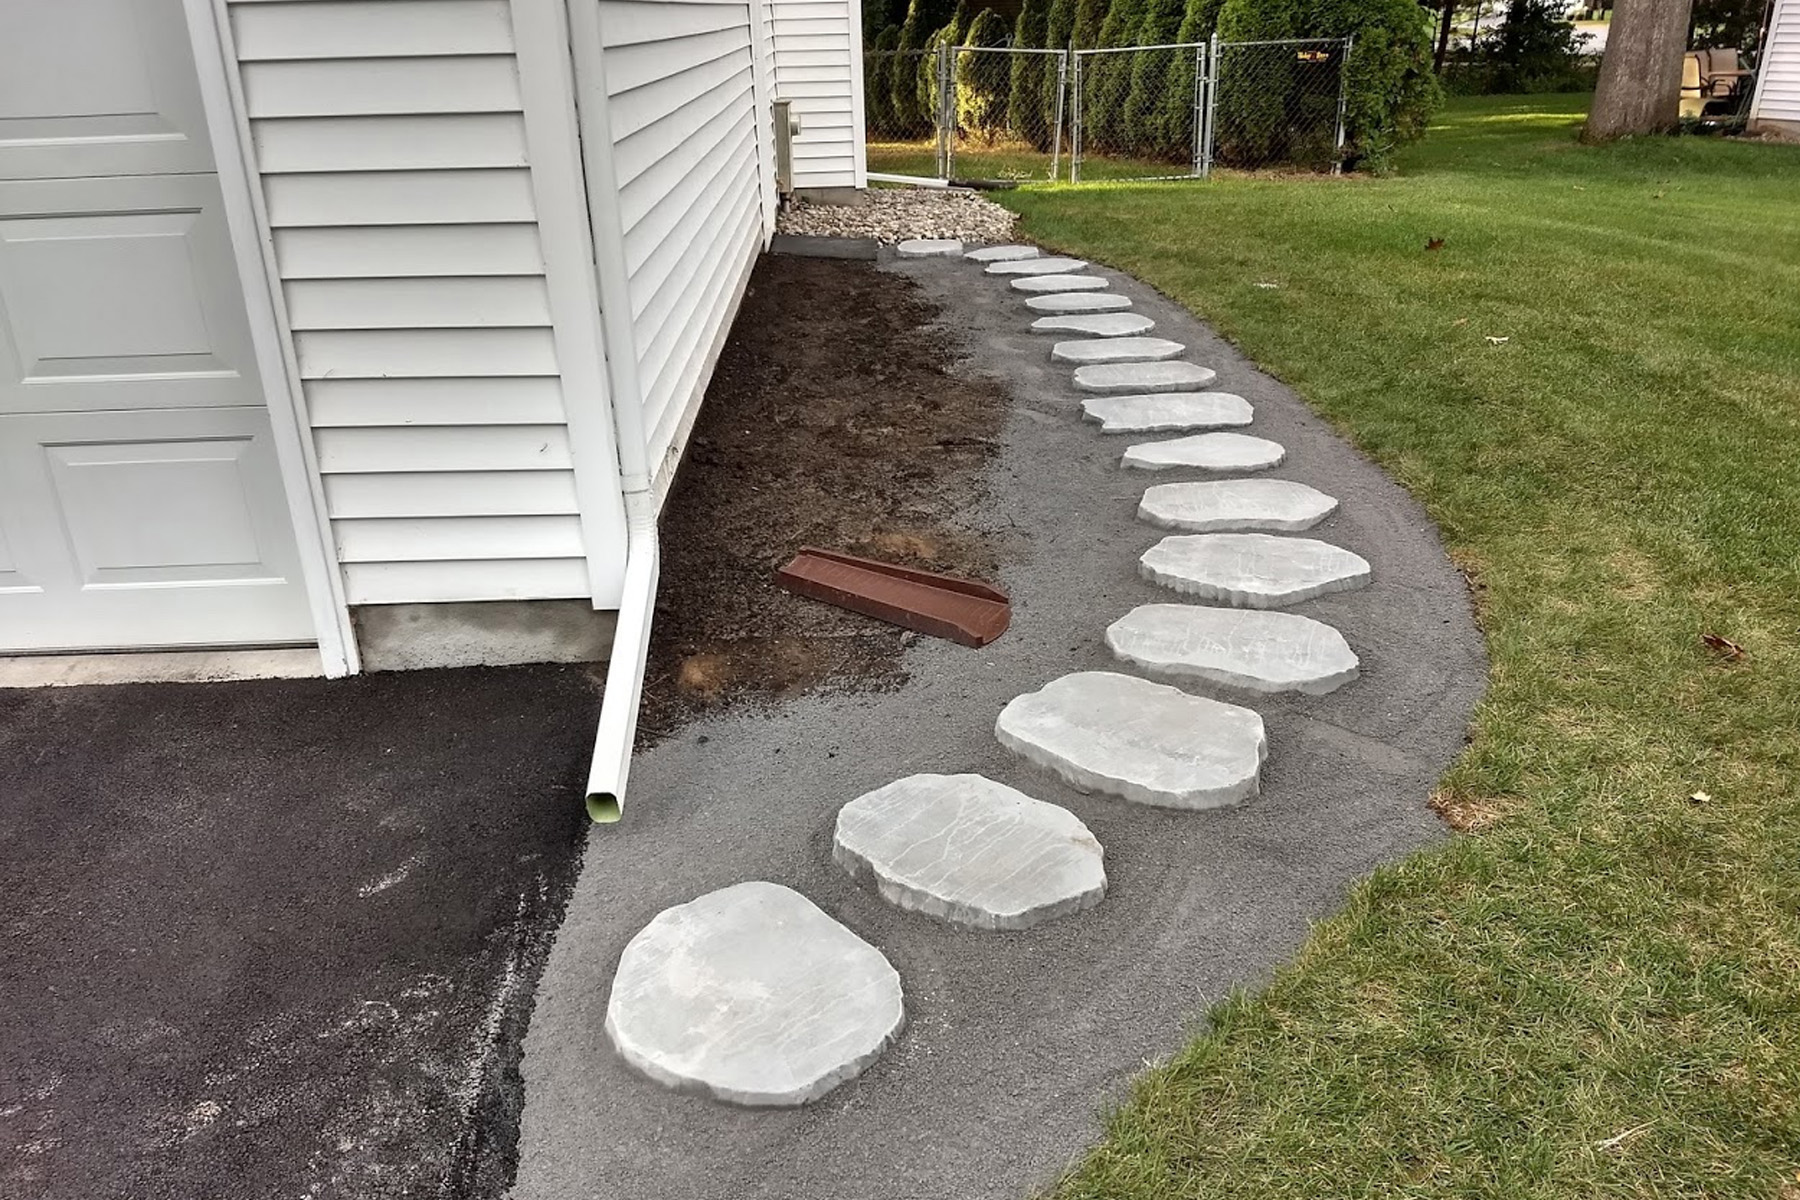 The pavers are set in sand along the side of the garage